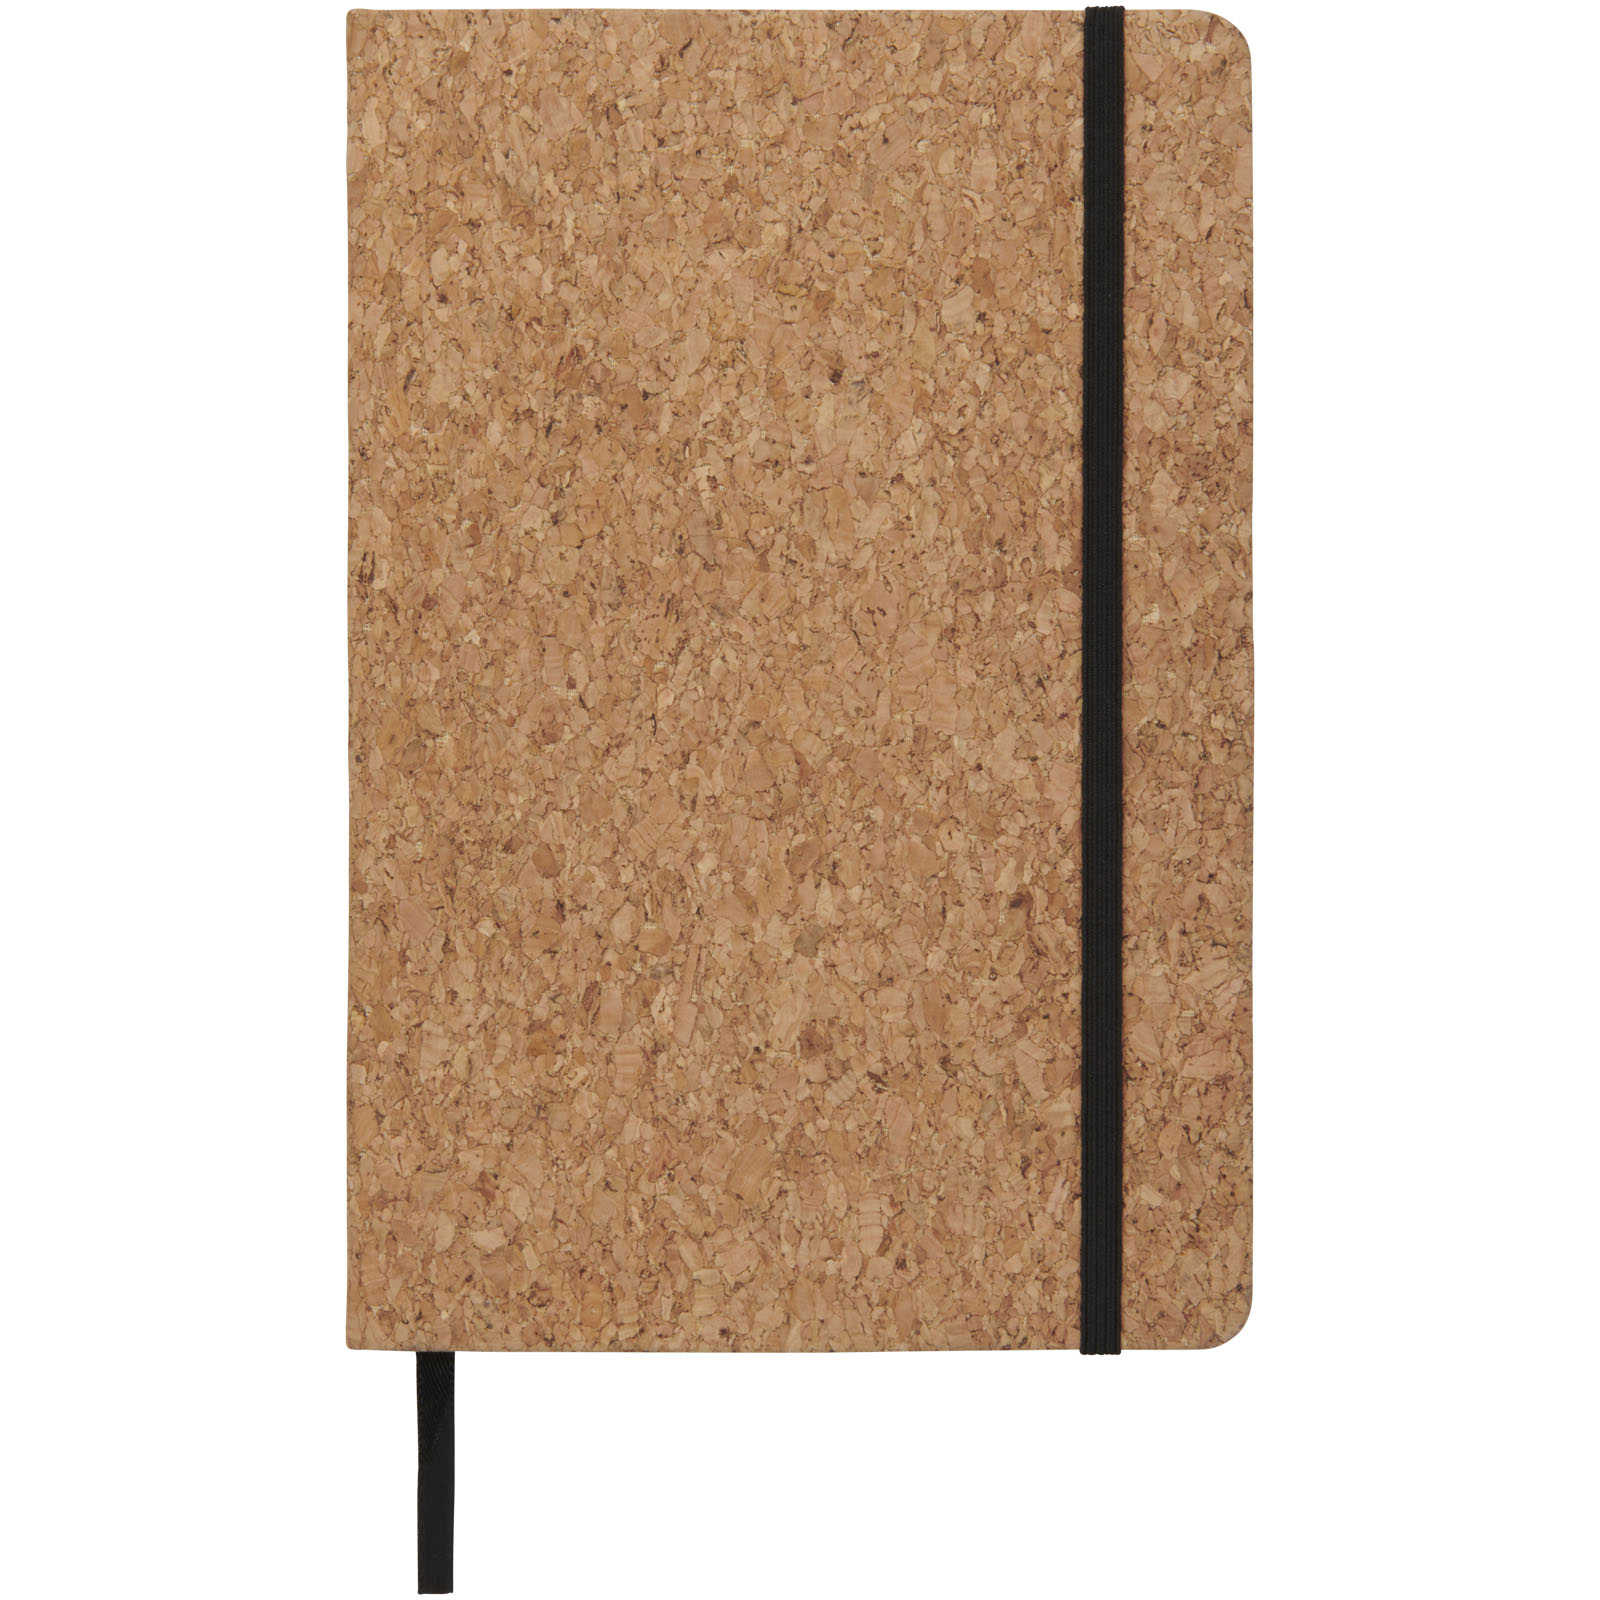 Advertising Hard cover notebooks - Napa A5 cork notebook - 1